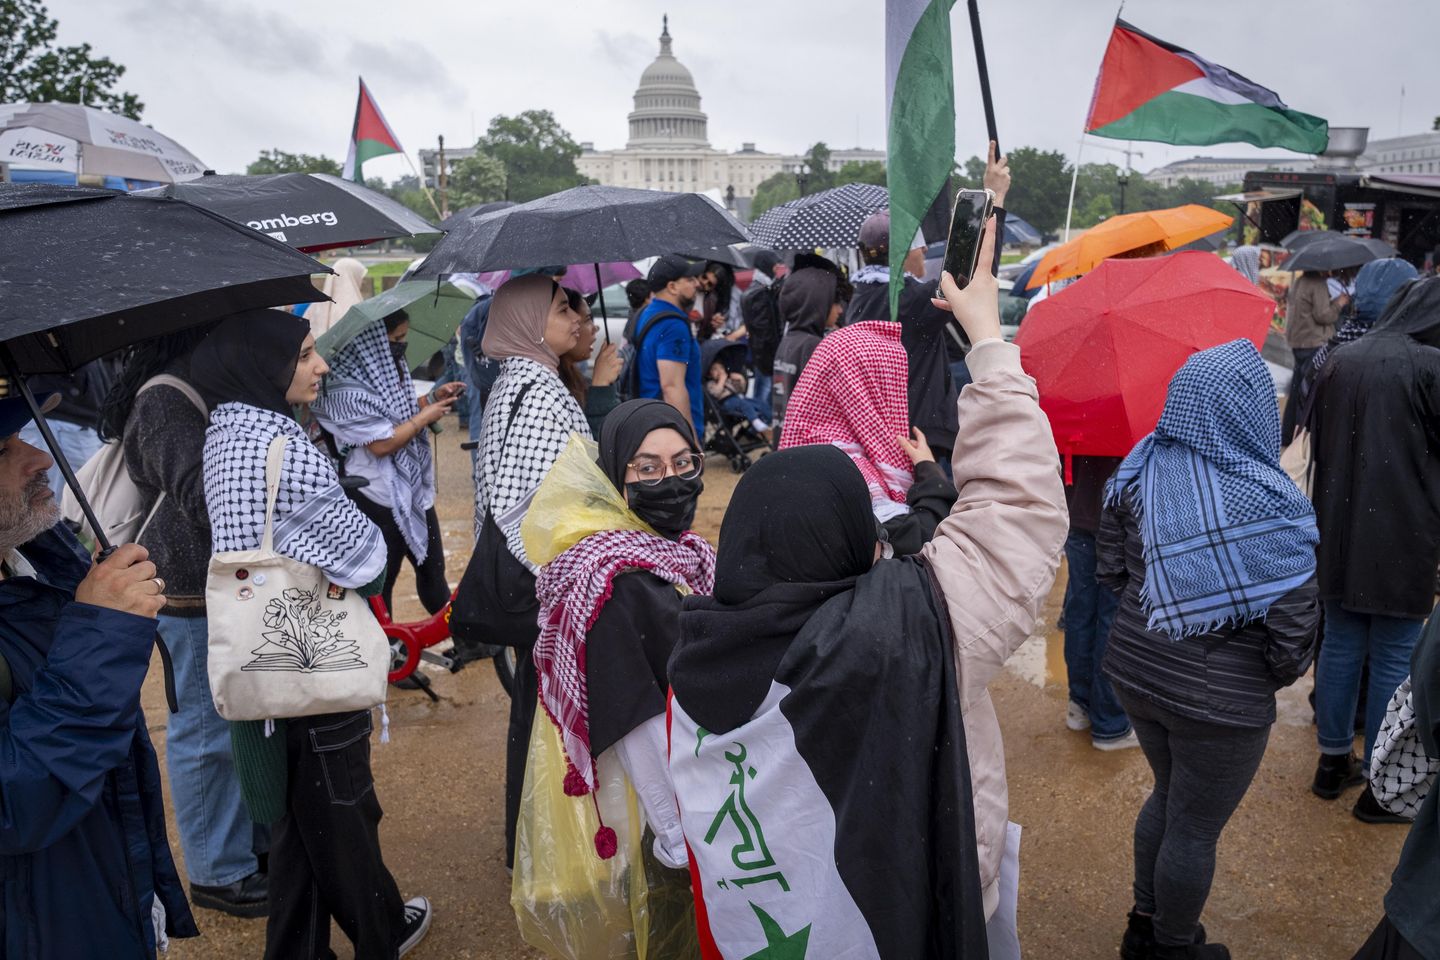 Hundreds of pro-Palestinian protesters rally in the rain in D.C.